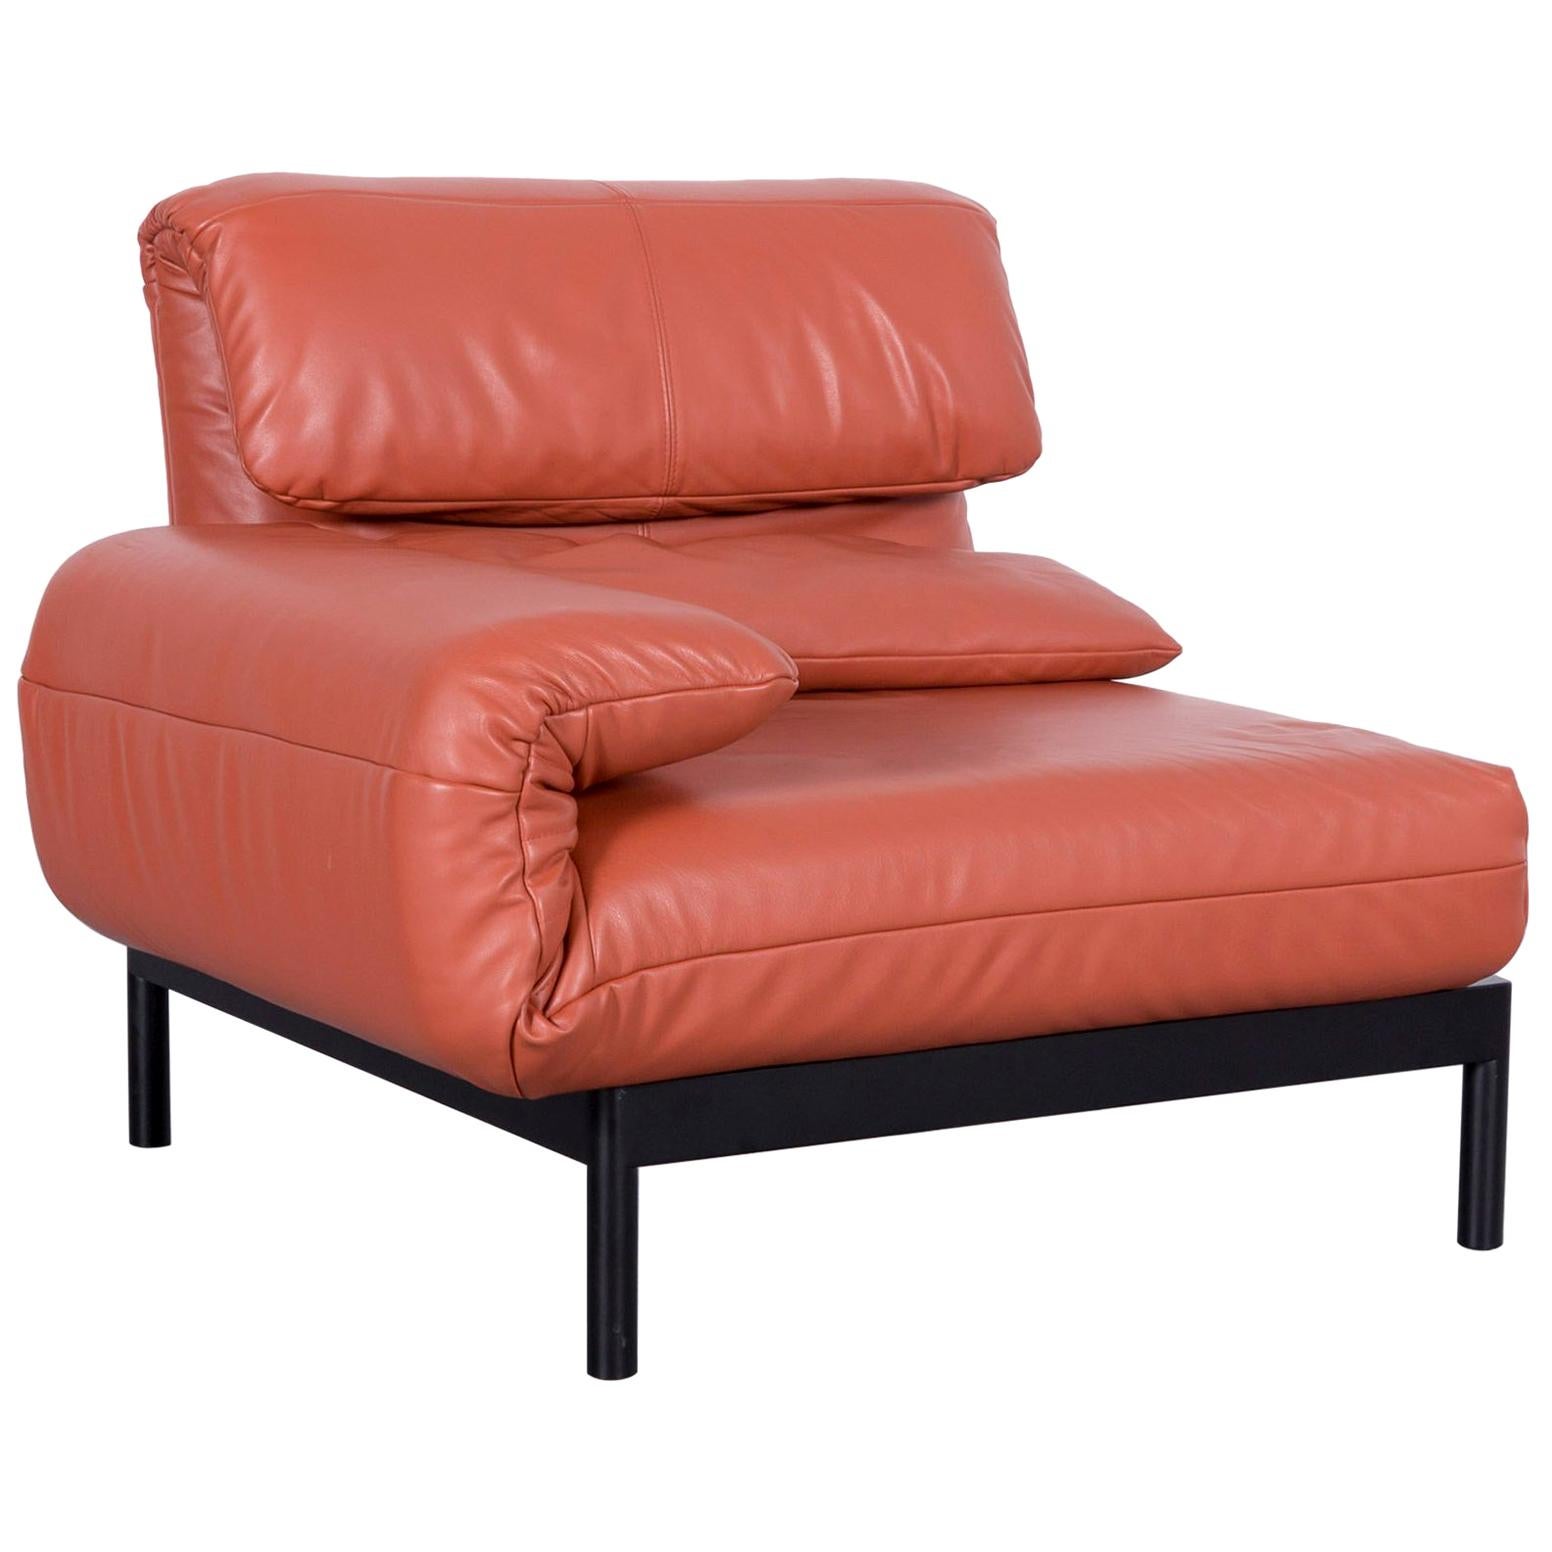 Rolf Benz Plura Leather Armchair Red Orange One-Seat Couch For Sale